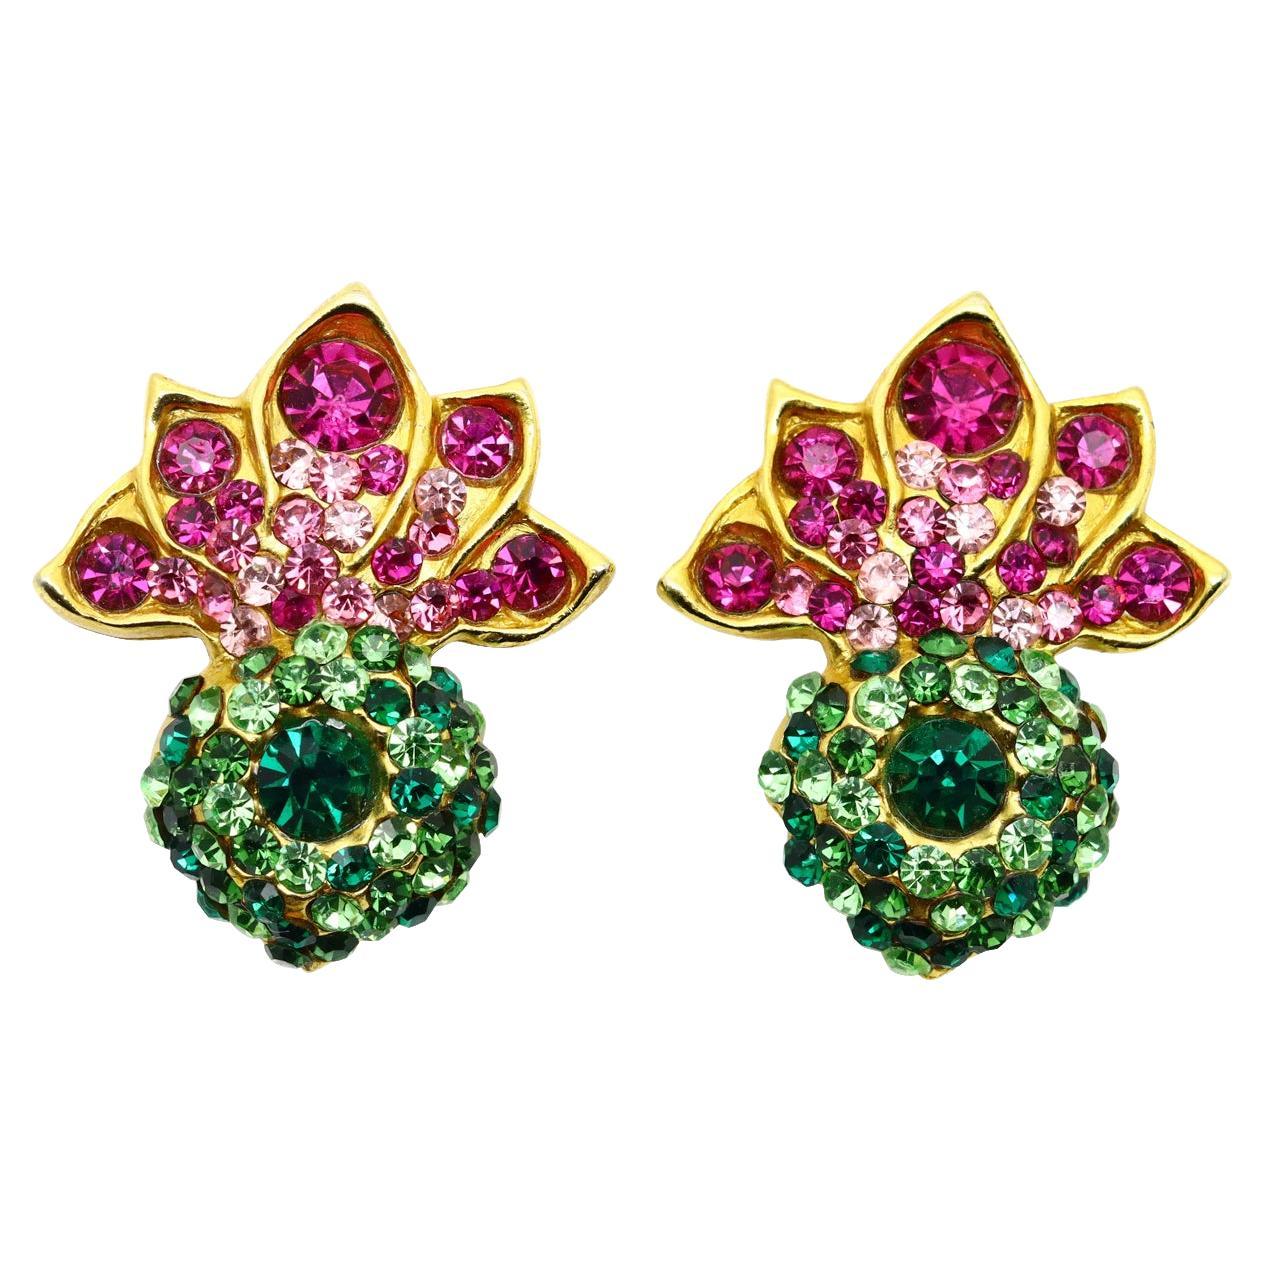 Vintage Lorenz Baumer Gold Tone with Pink and Green Crystal Earrings Circa 1980s